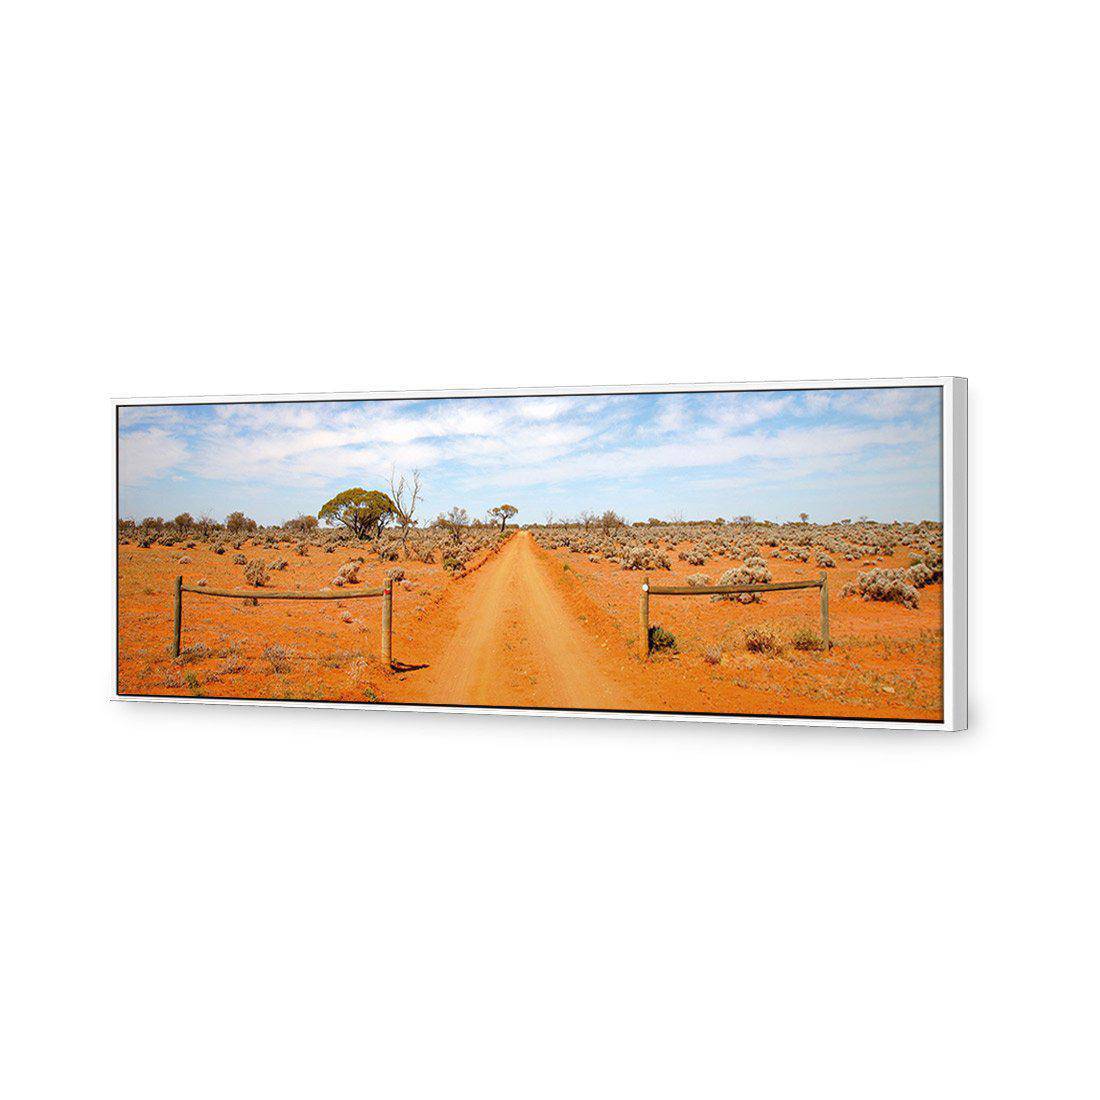 Outback Road Canvas Art-Canvas-Wall Art Designs-60x20cm-Canvas - White Frame-Wall Art Designs